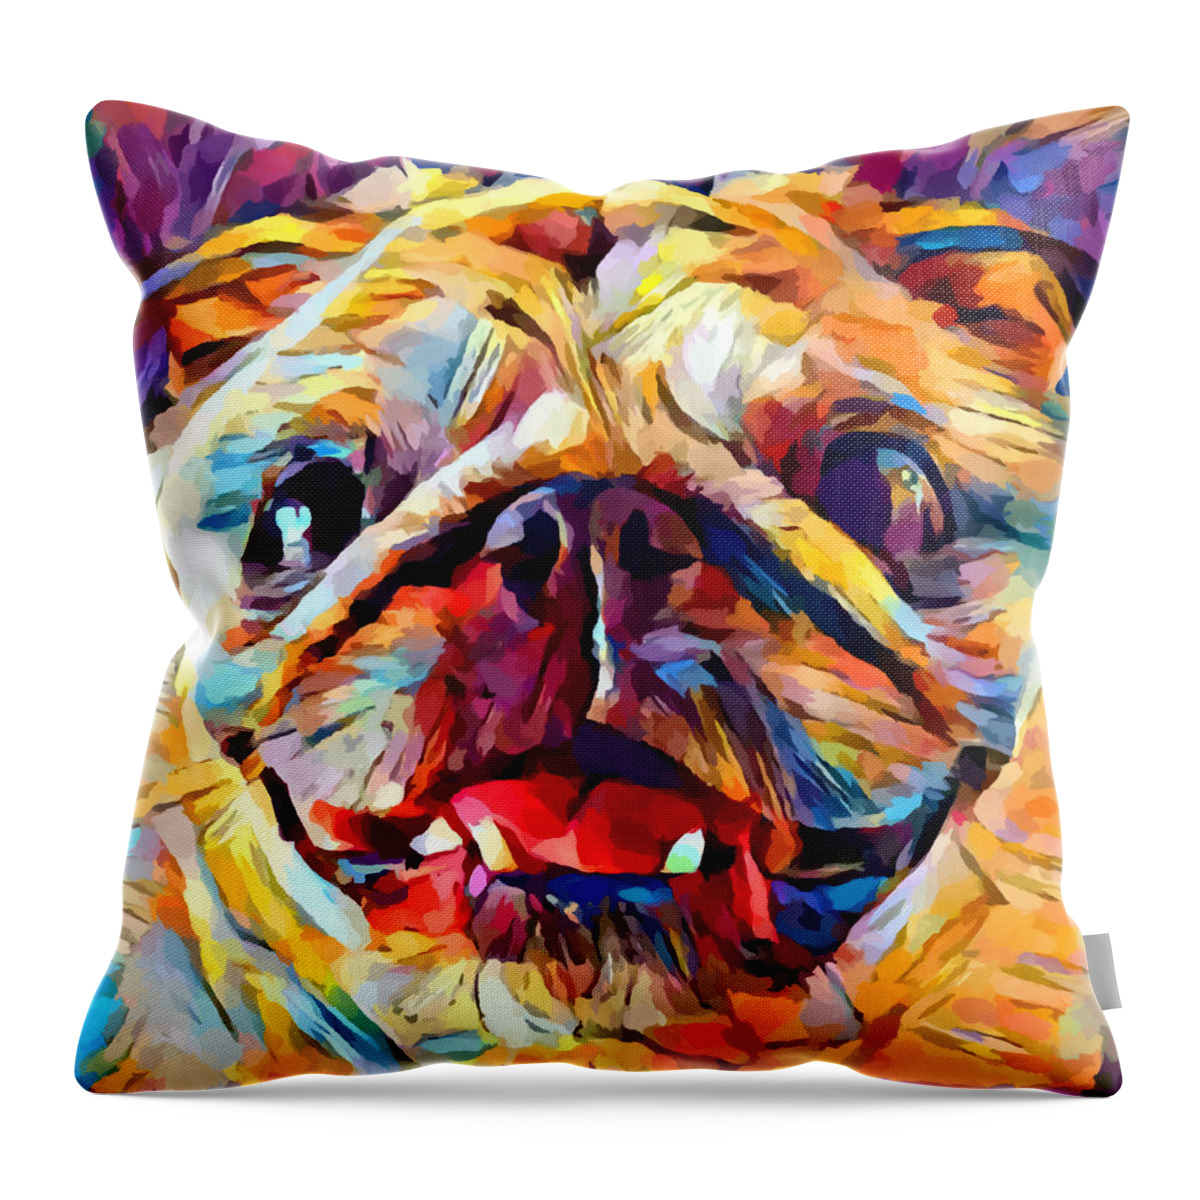 Pug Throw Pillow featuring the painting Pug 4 by Chris Butler